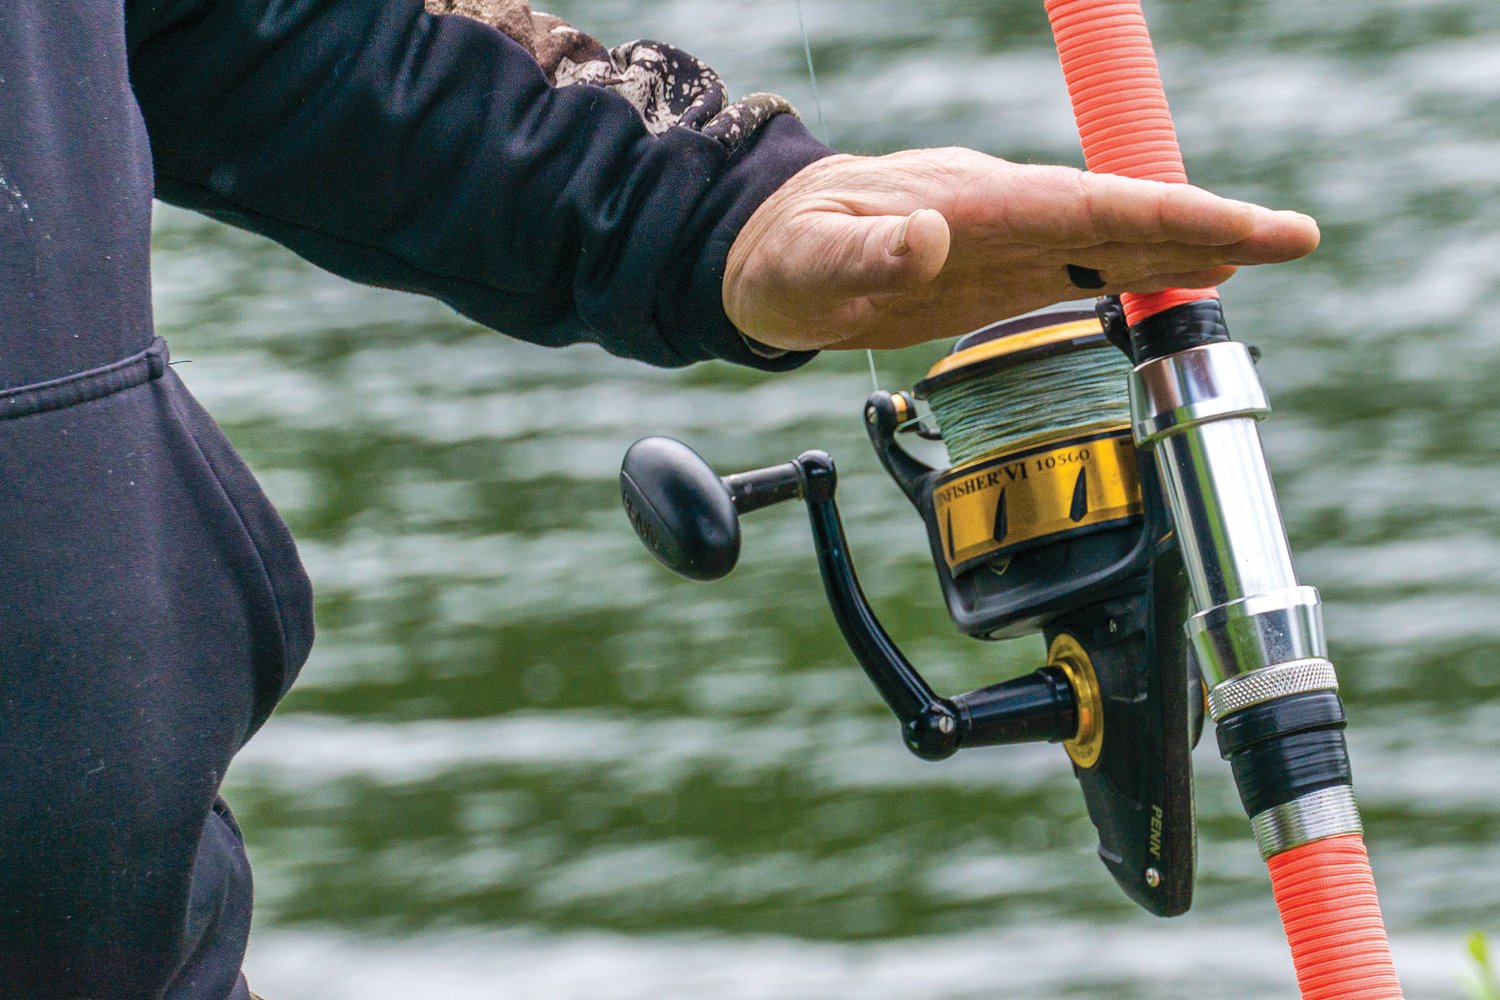 Rich Eaton talks about the reel on his custom Meat Hunter pole.